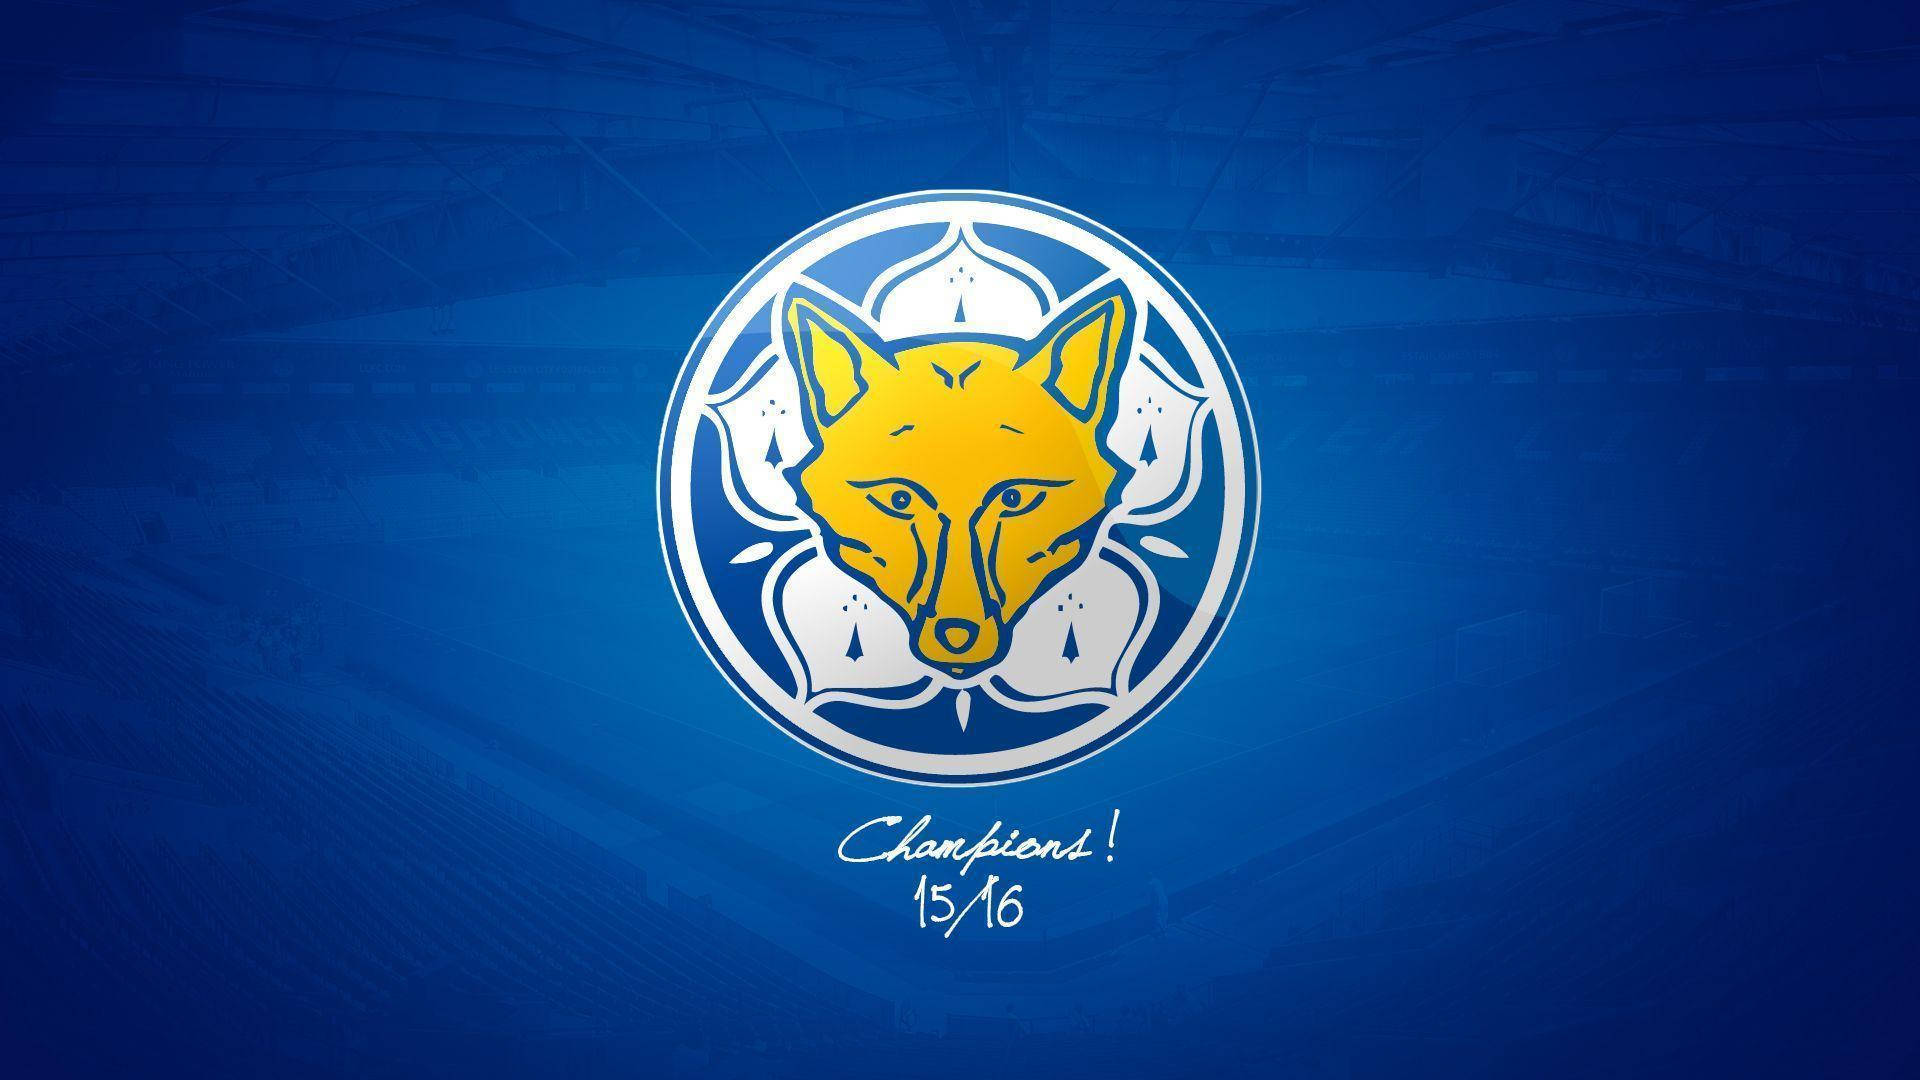 Leicestercity Mästare (alternatively, Leicester City Champions In English Would Be Understood By Most Swedes) Wallpaper